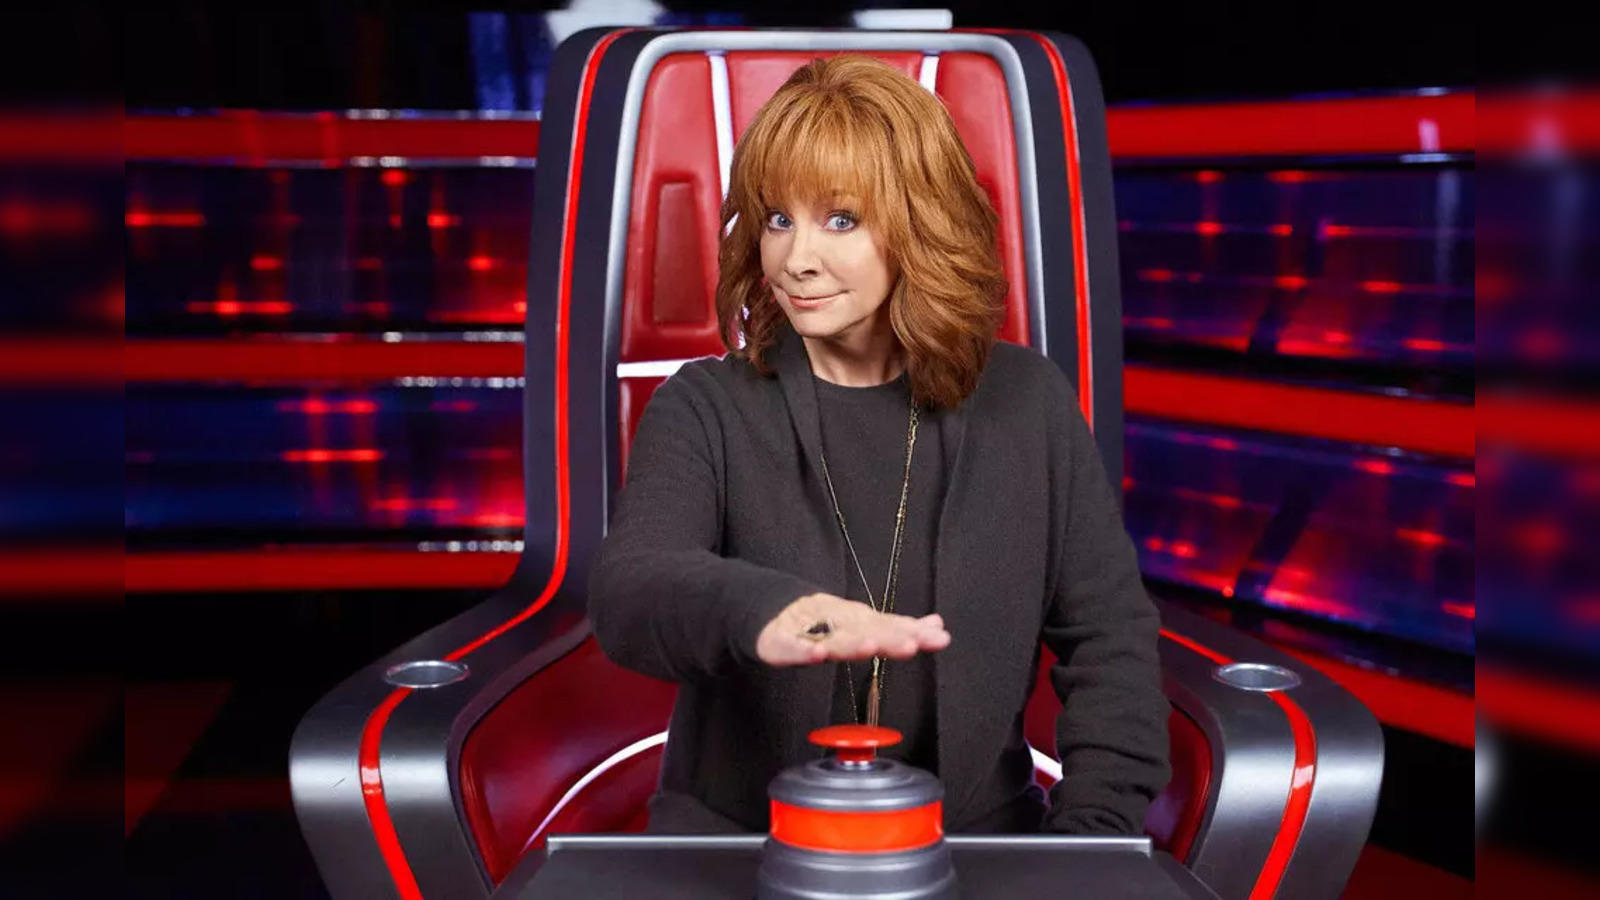 What Time is the Tv Show the Voice on? Discover the Schedule and Channel!